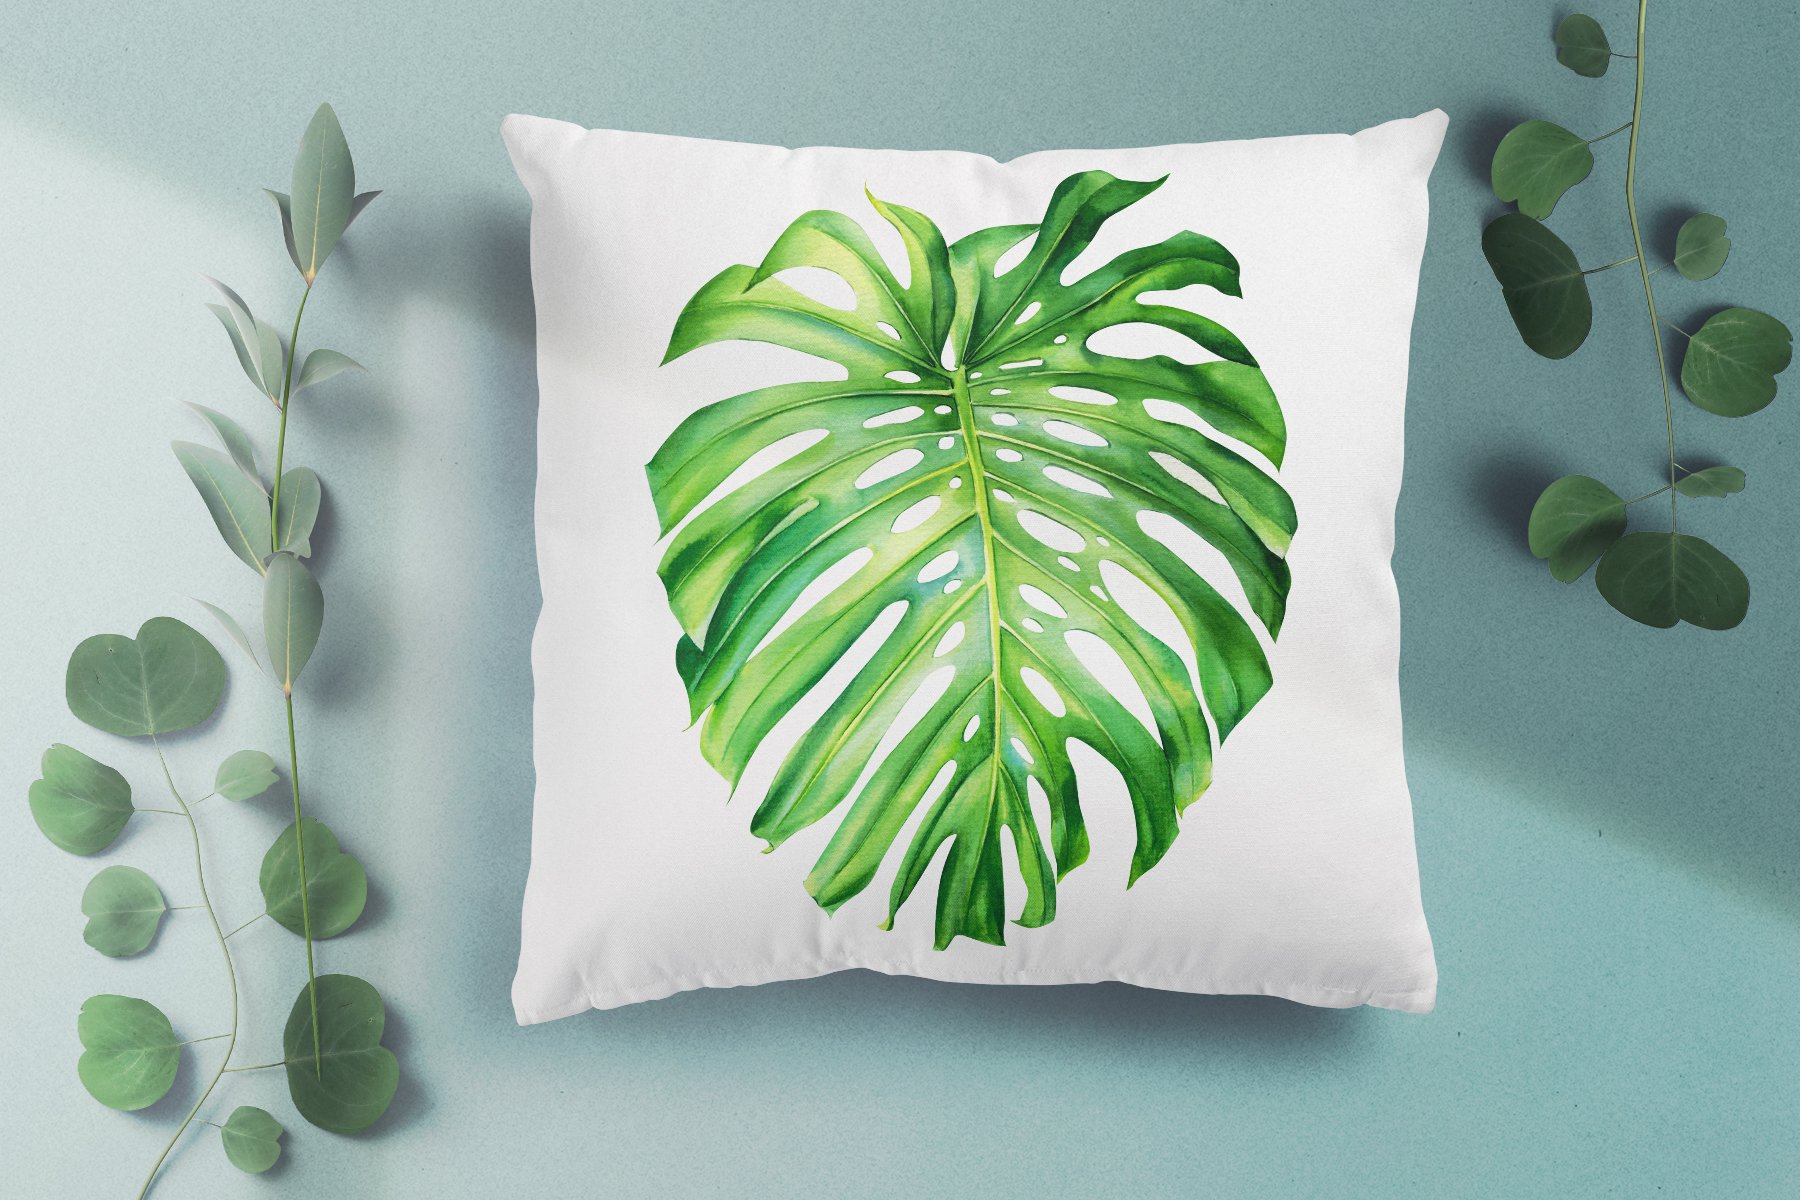 White pillow with a green leaf on it.